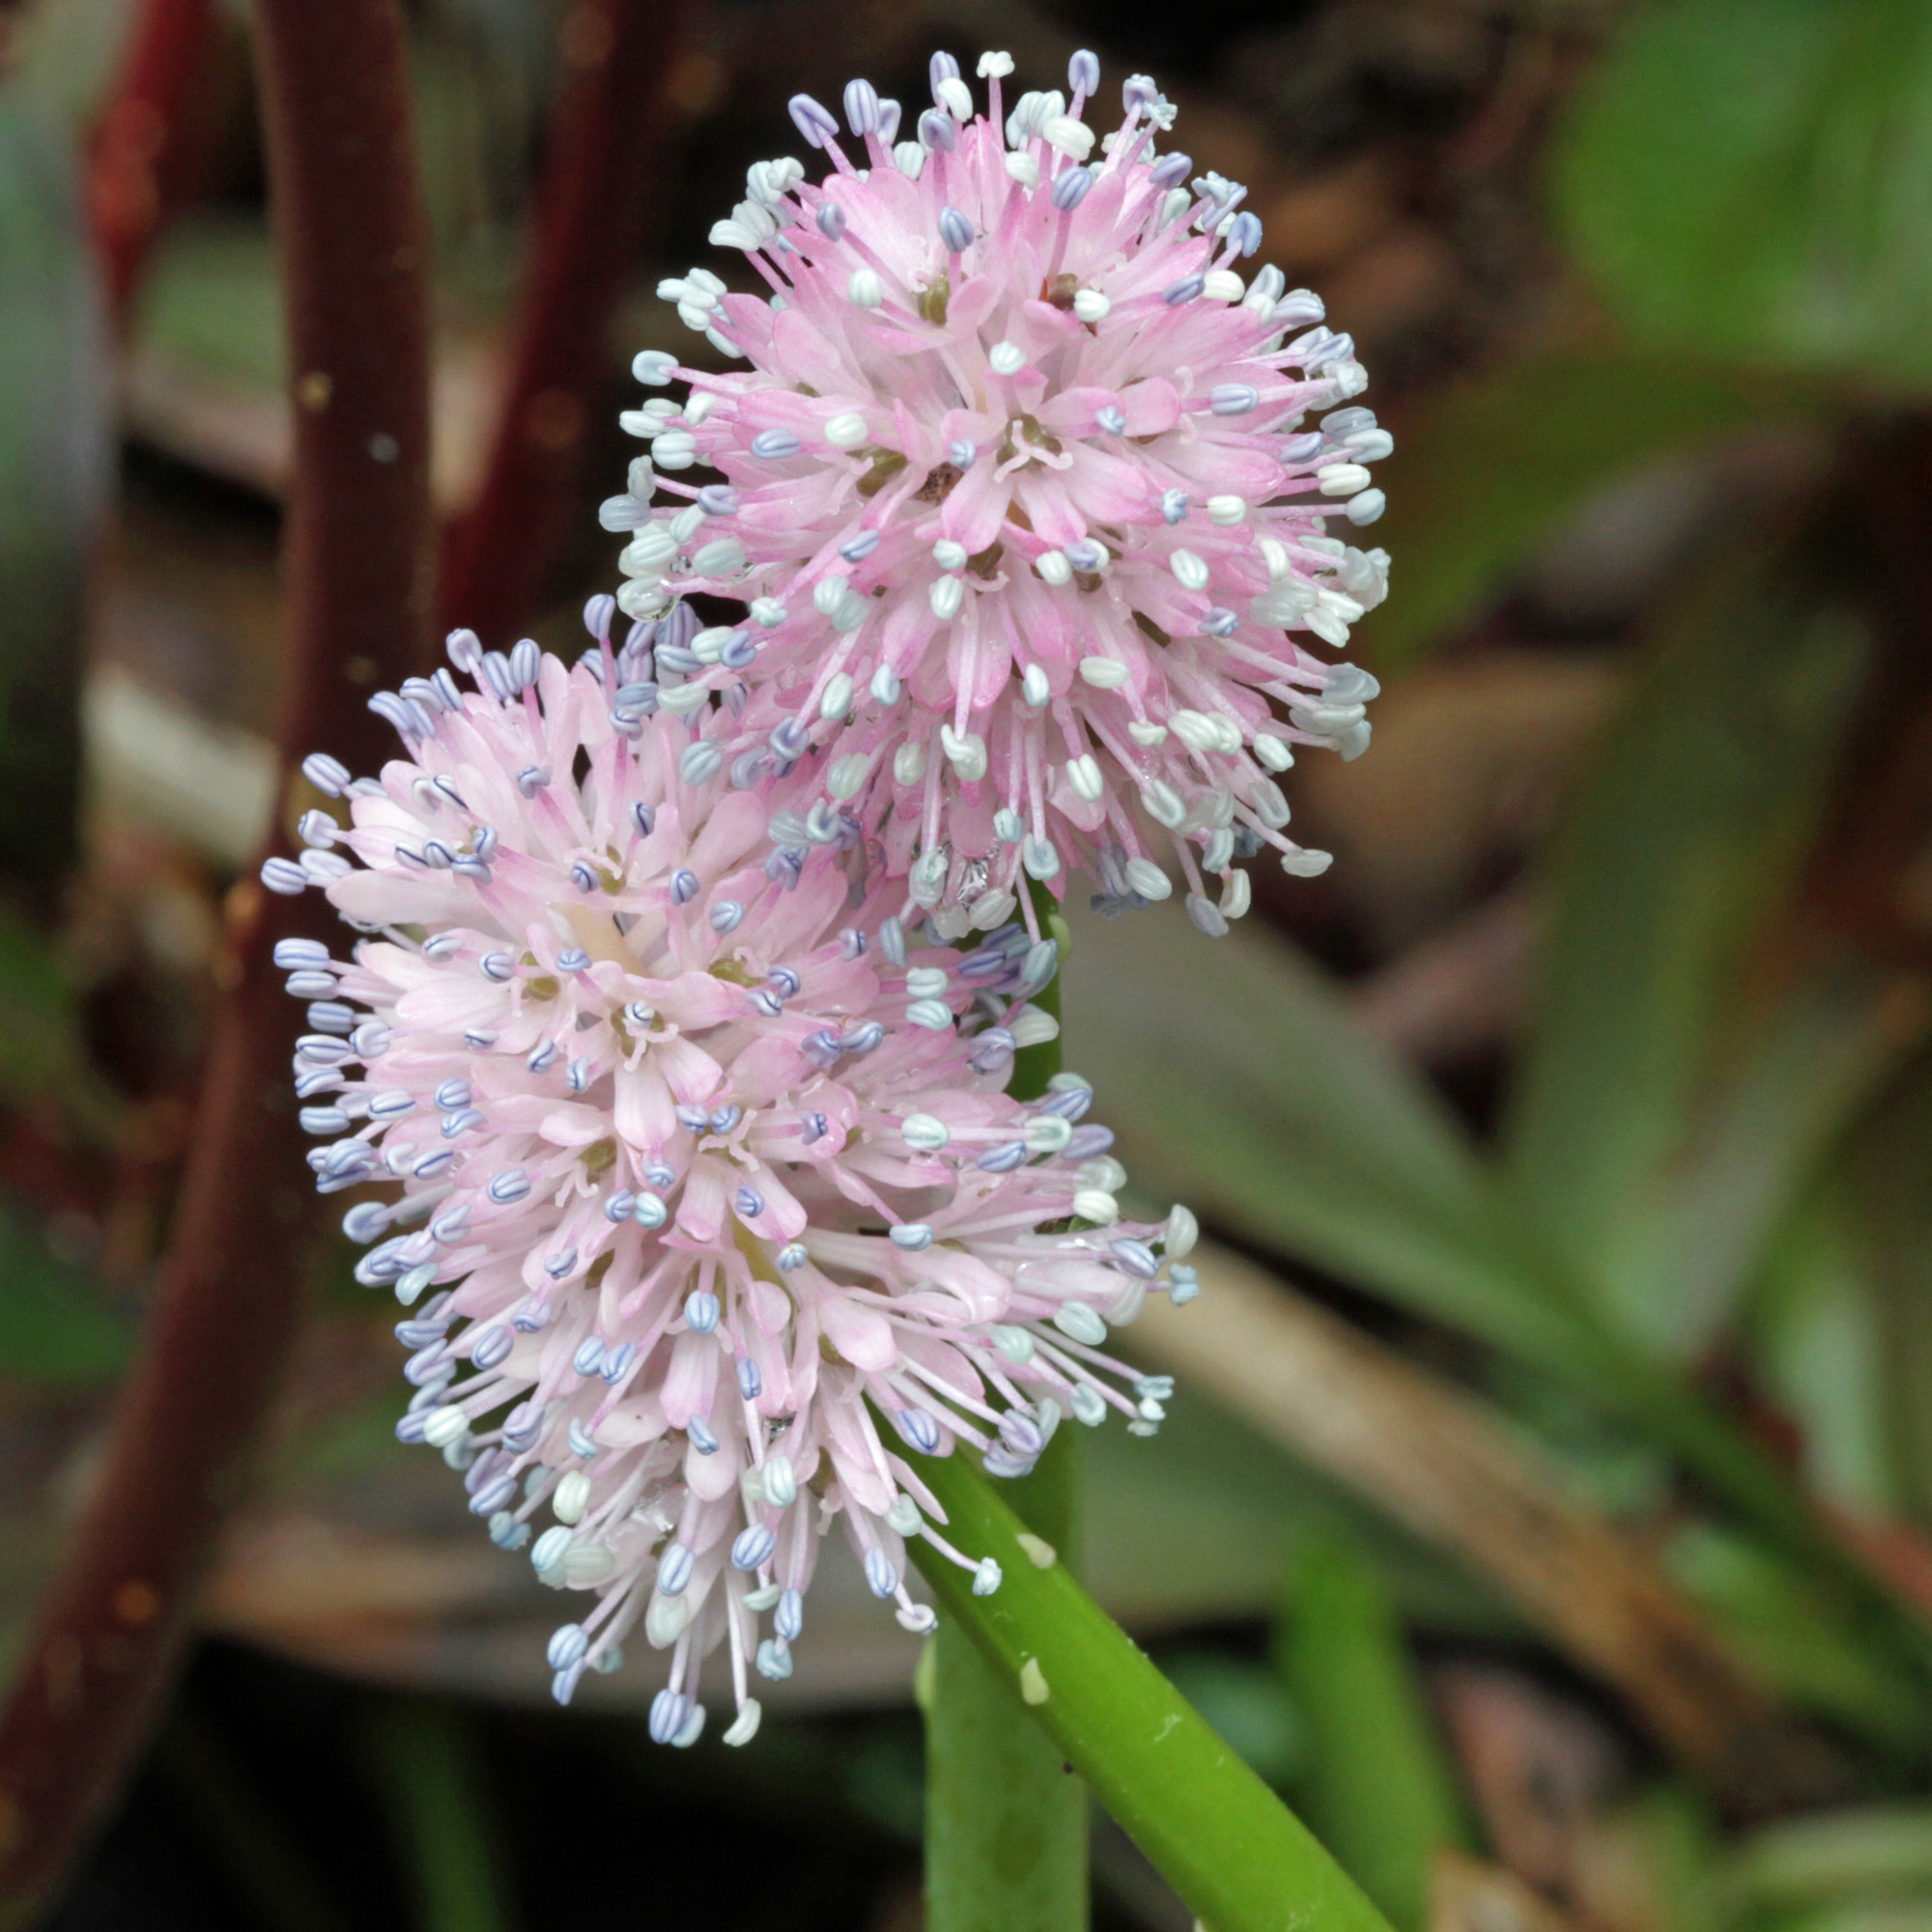 The Scientific Name is Helonias bullata. You will likely hear them called Swamp Pink. This picture shows the Individual flowers are slender and tubular with showy, protruding stamens. of Helonias bullata